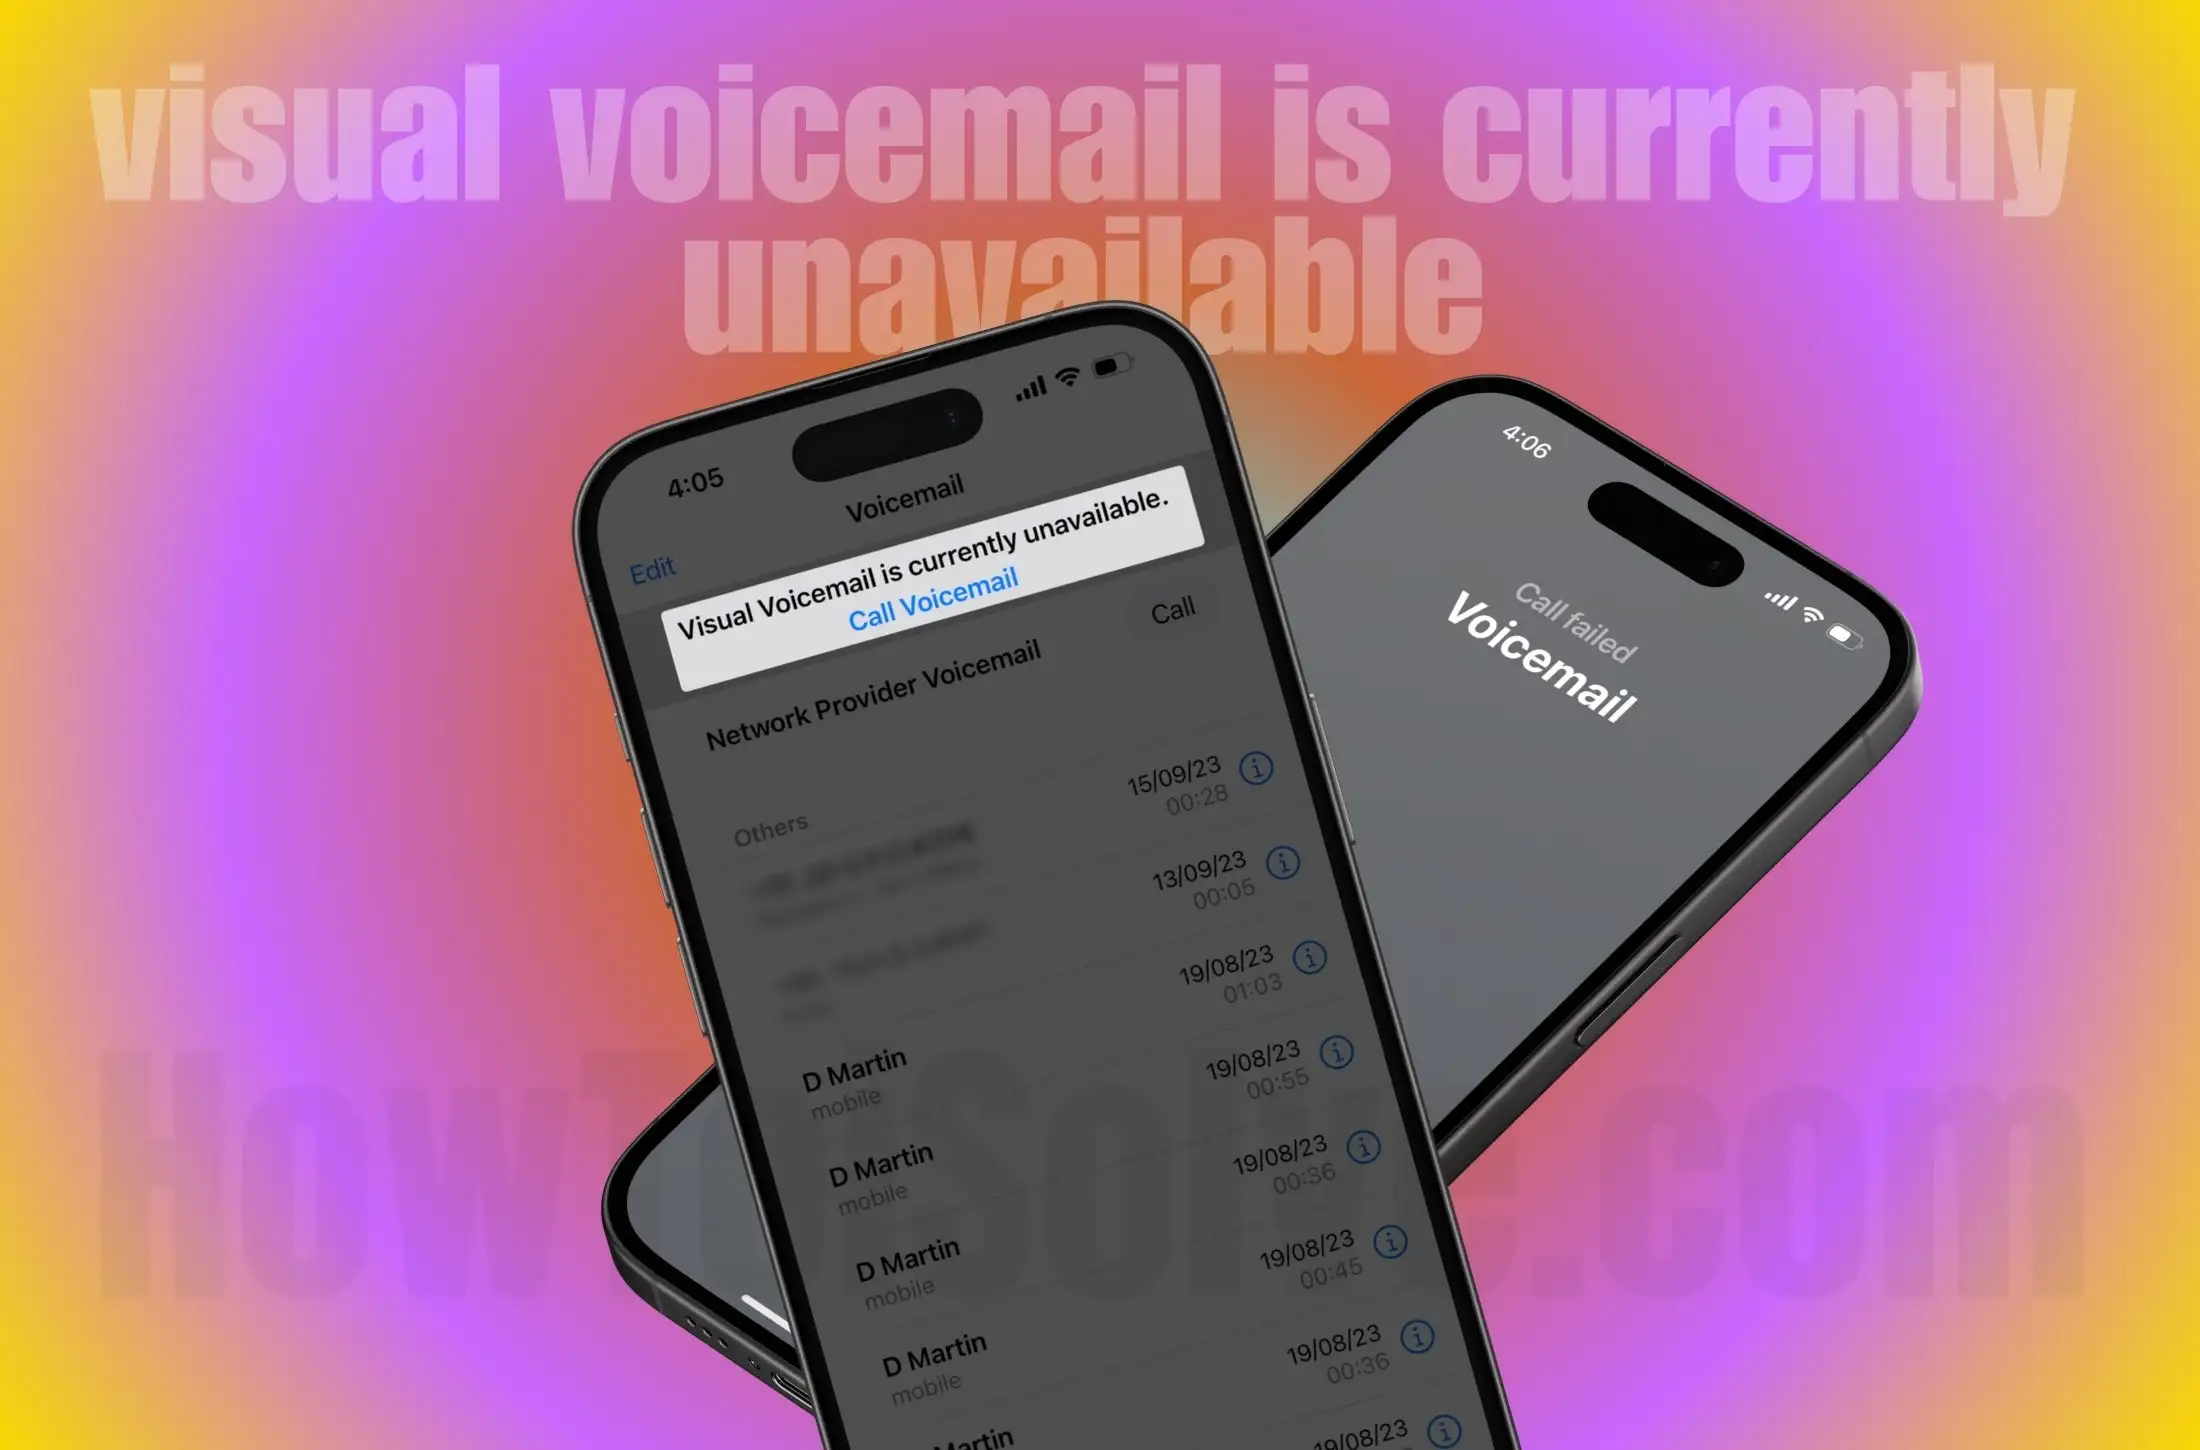 How to Fix visual voicemail is currently unavailable on iPhone